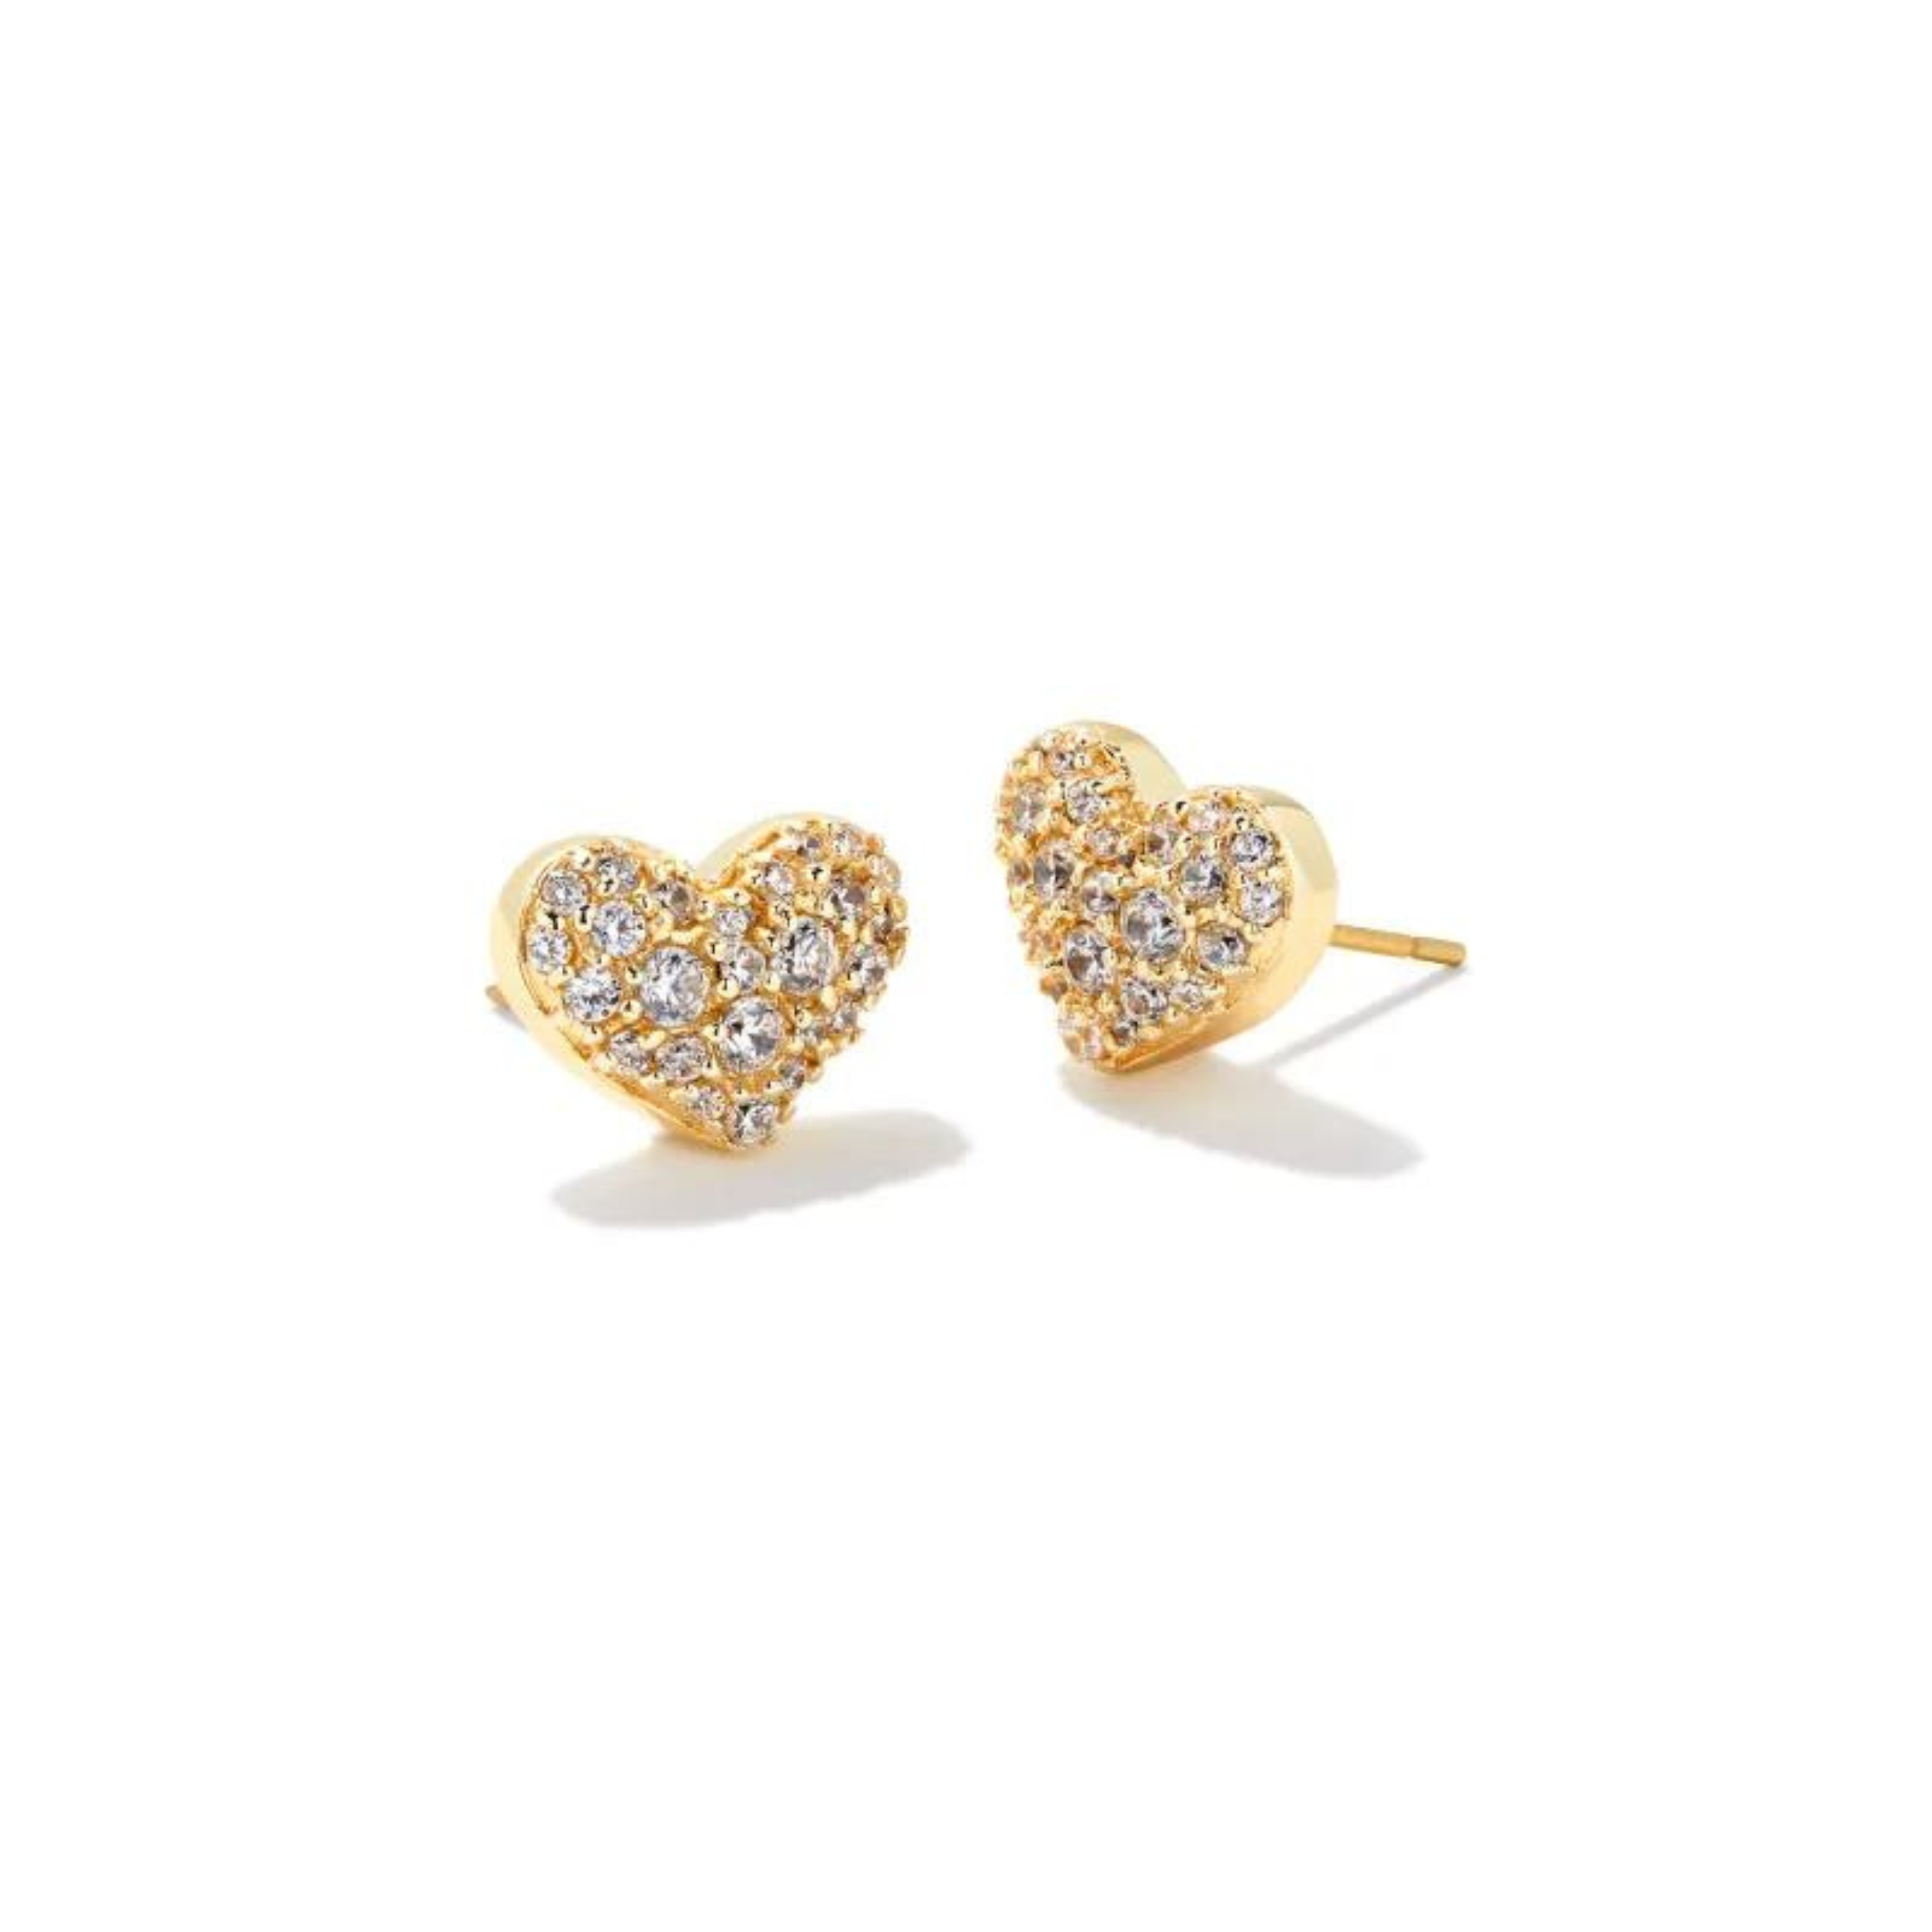 Gold heart shaped earrings with crystals, pictured on white background.